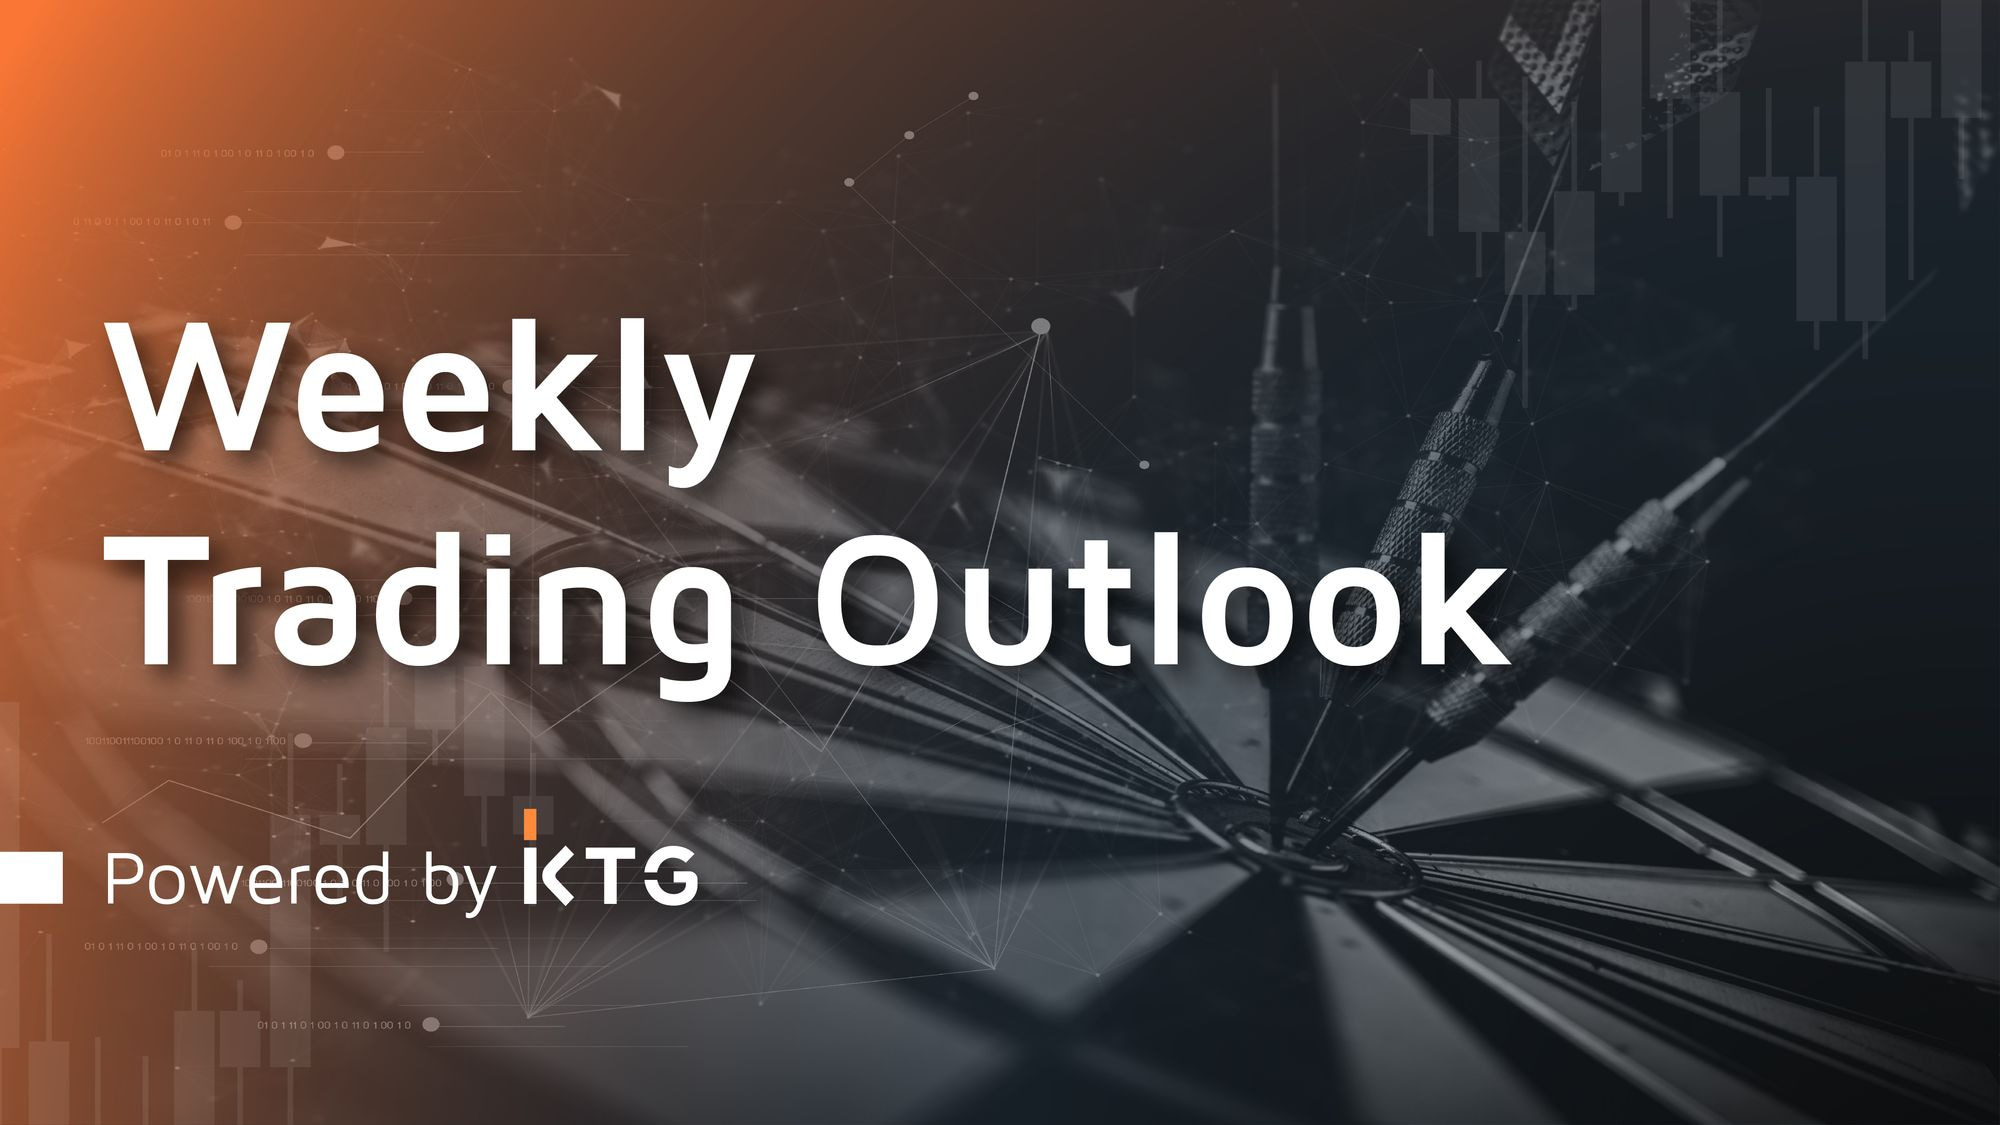 What’s behind the recent market dump? - #TradingOutlook Powered by KTG